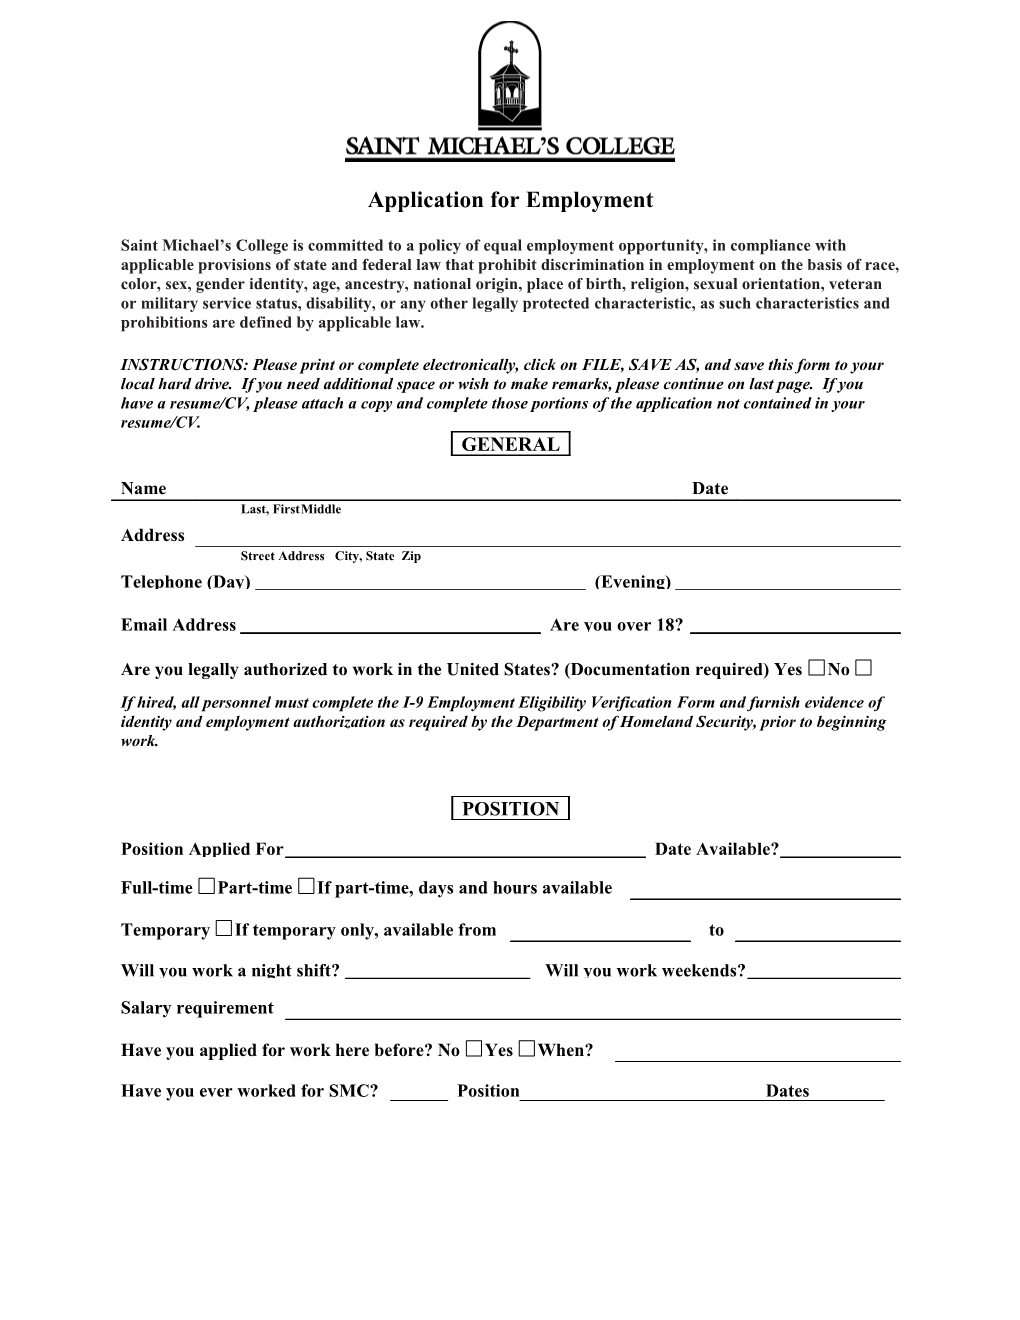 Application for Employment s155